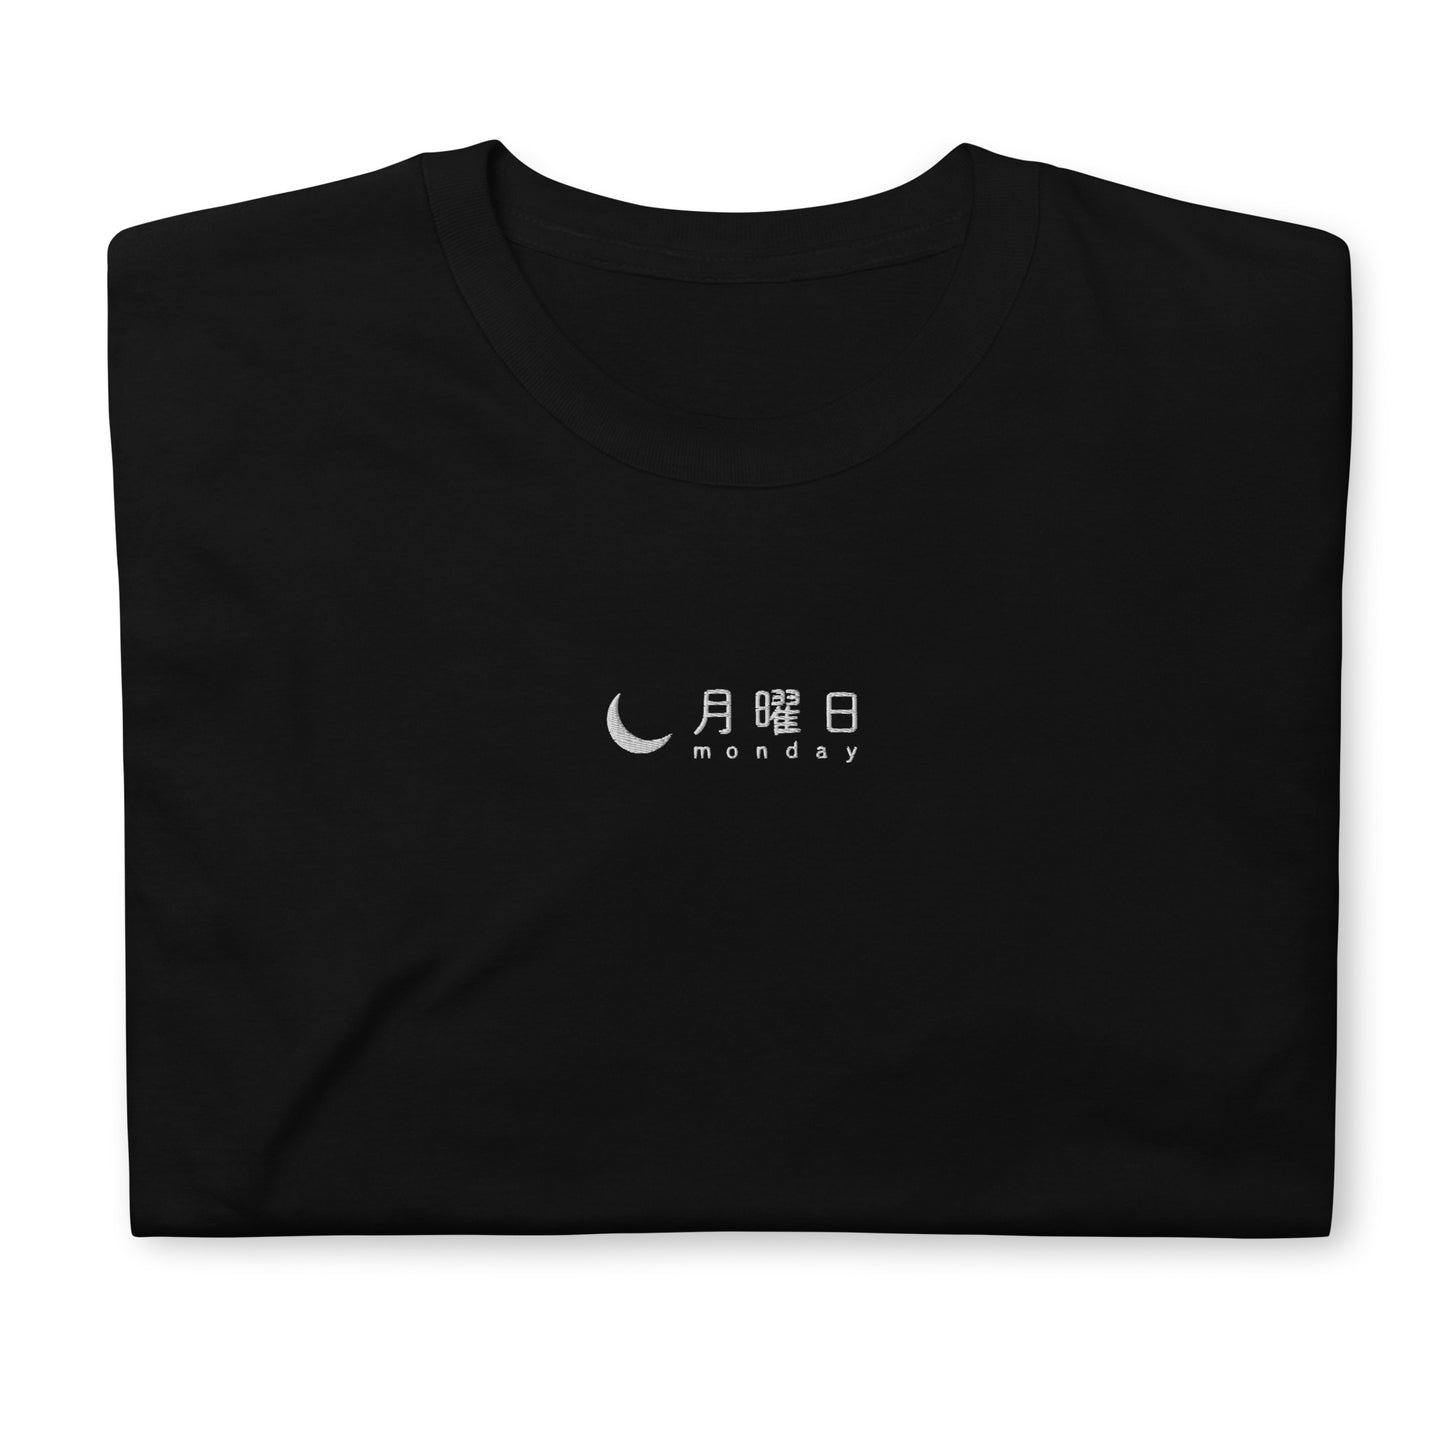 Black High Quality Tee - Front Design with an Black "Monday" in Japanese and English